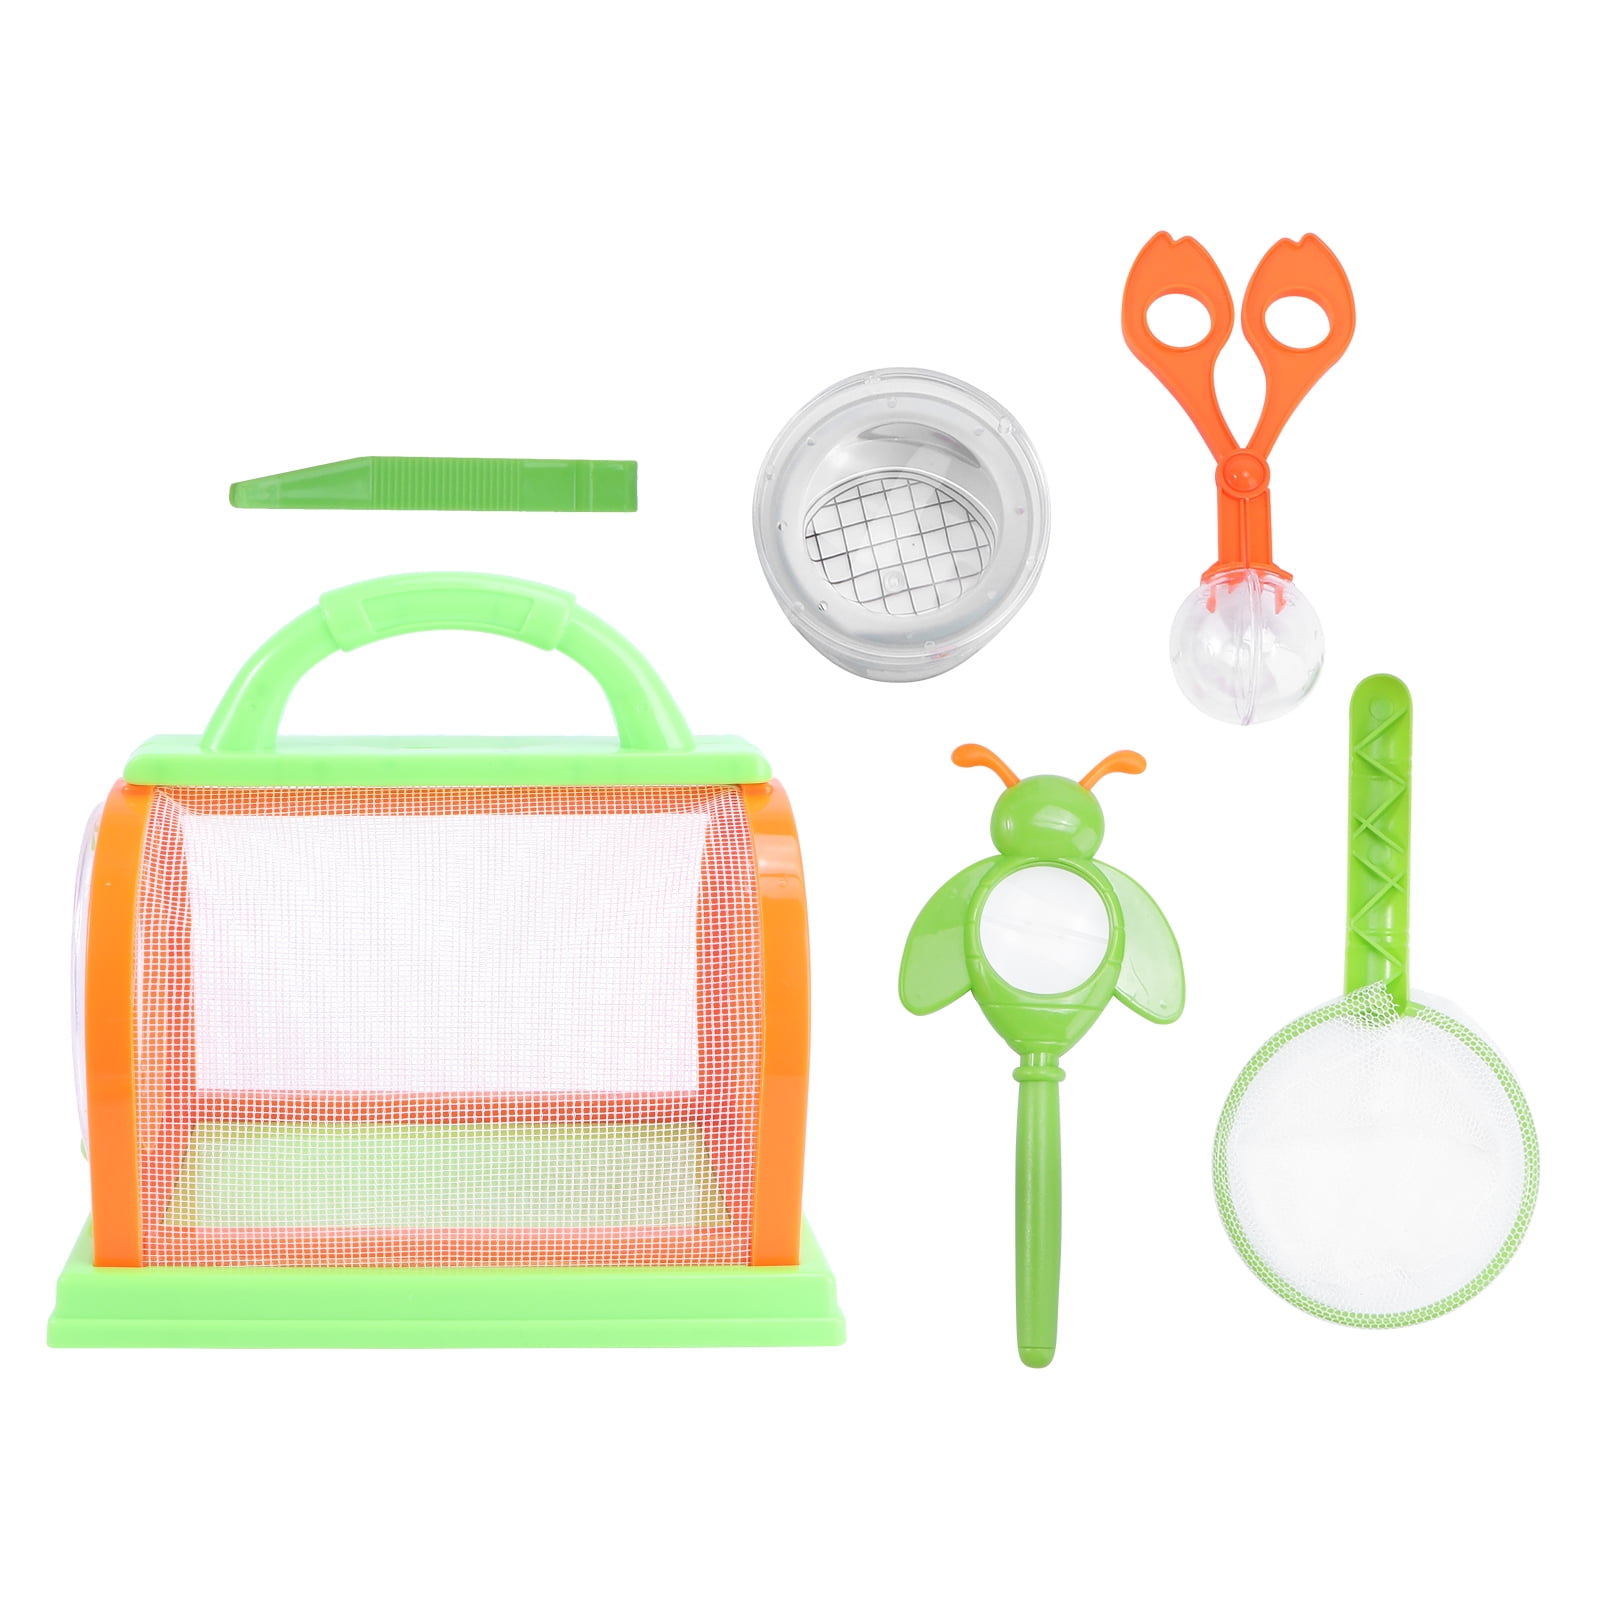 play-act bug catcher kit for kids - light up critter habitat box for  indoor/outdoor insect collecting